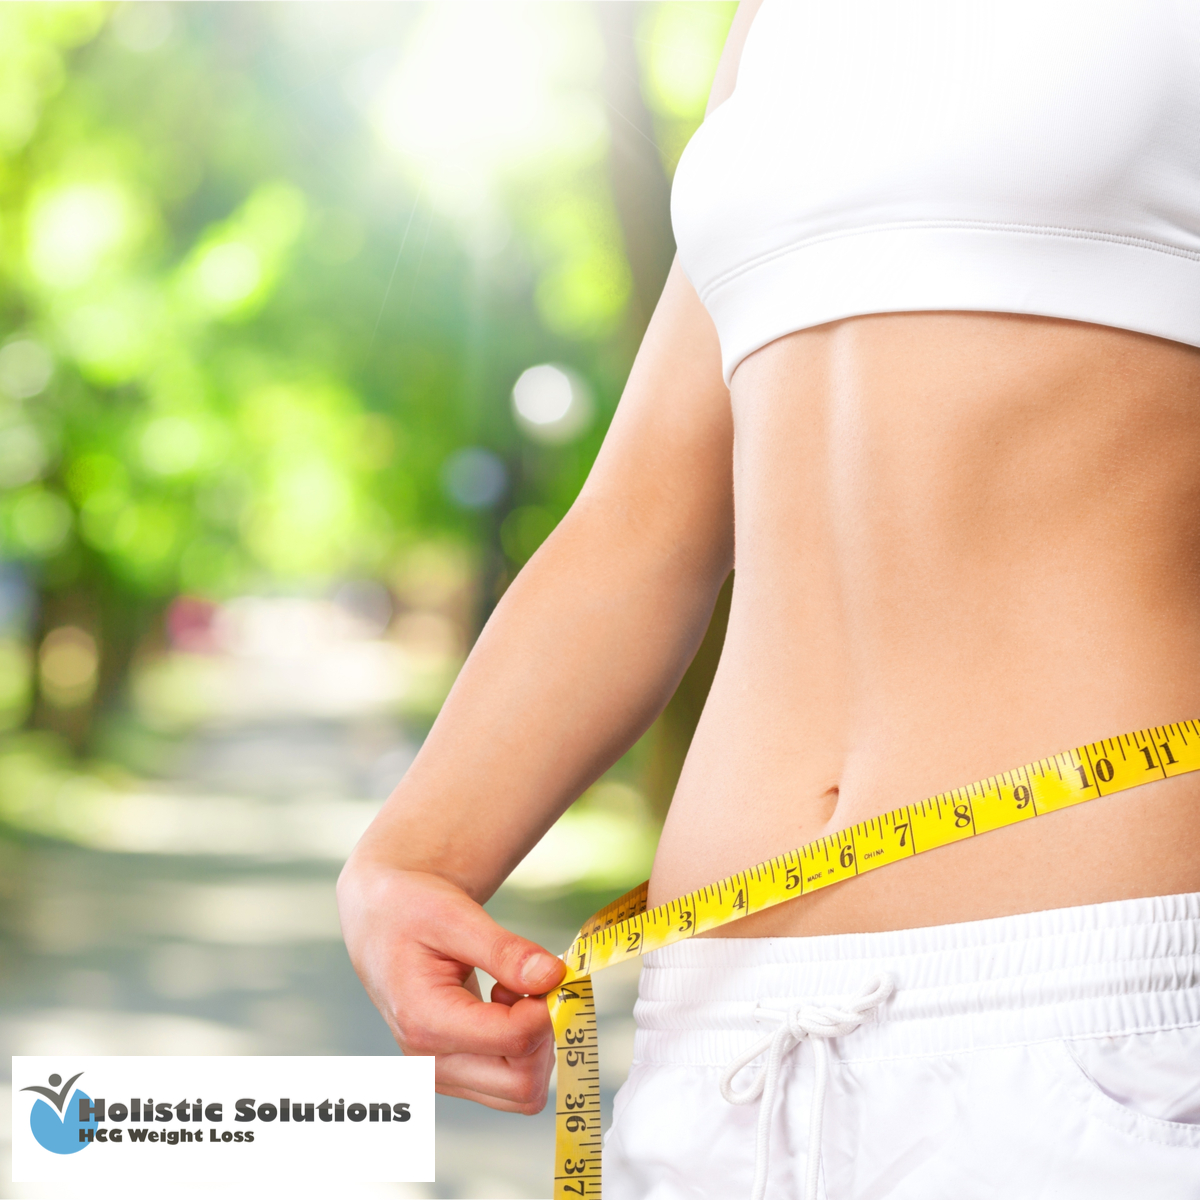 Find Out What An HCG Weight Loss Doctor Near Irvine Can Do For You